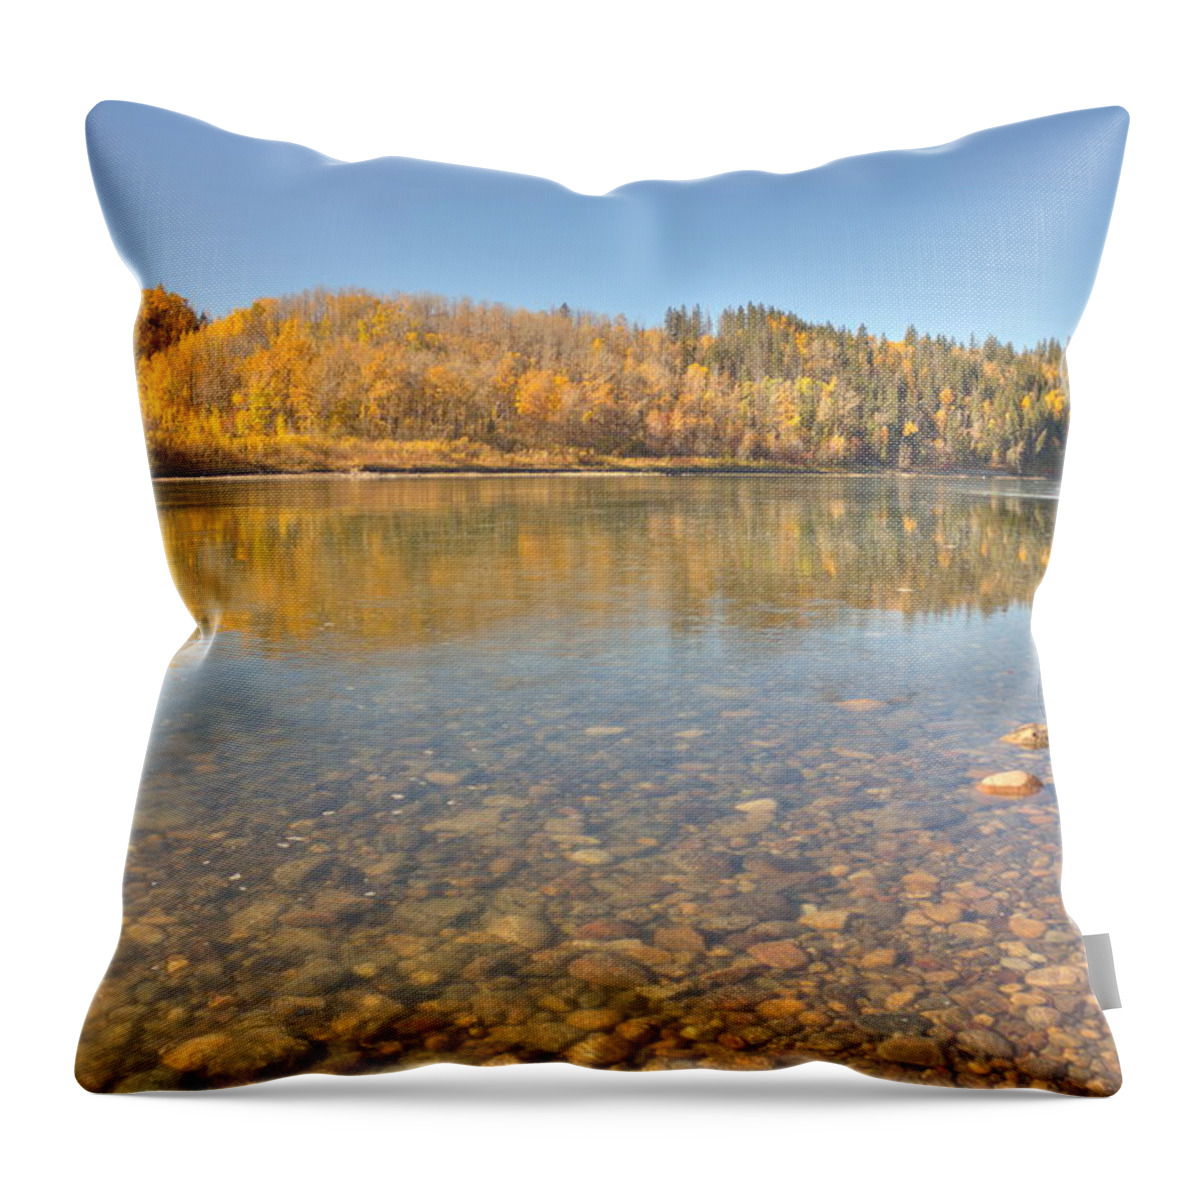 River Throw Pillow featuring the photograph Swift Flowing Water - The North Saskatchewan River by Jim Sauchyn